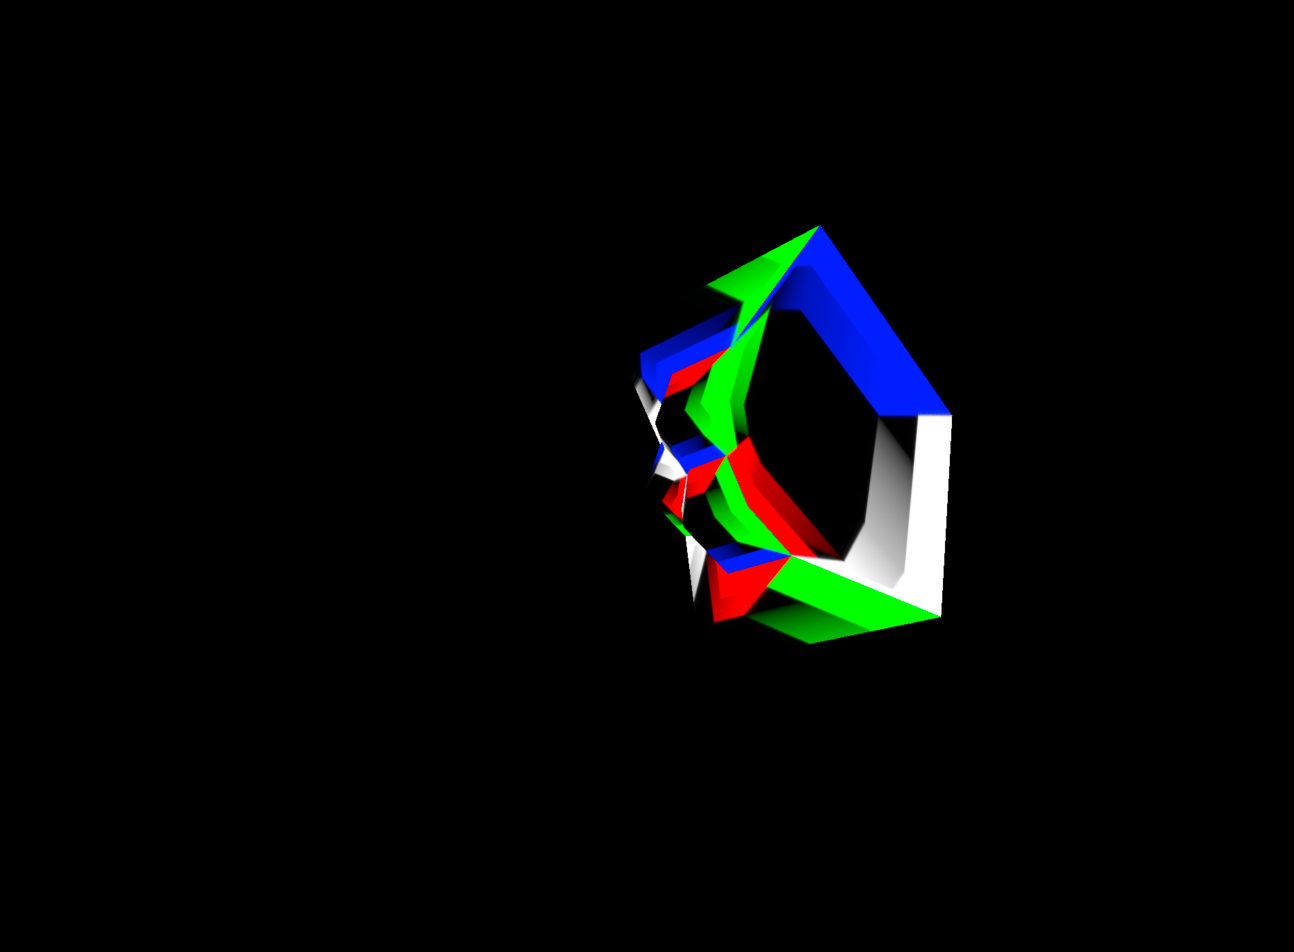 Here's an inverted cube